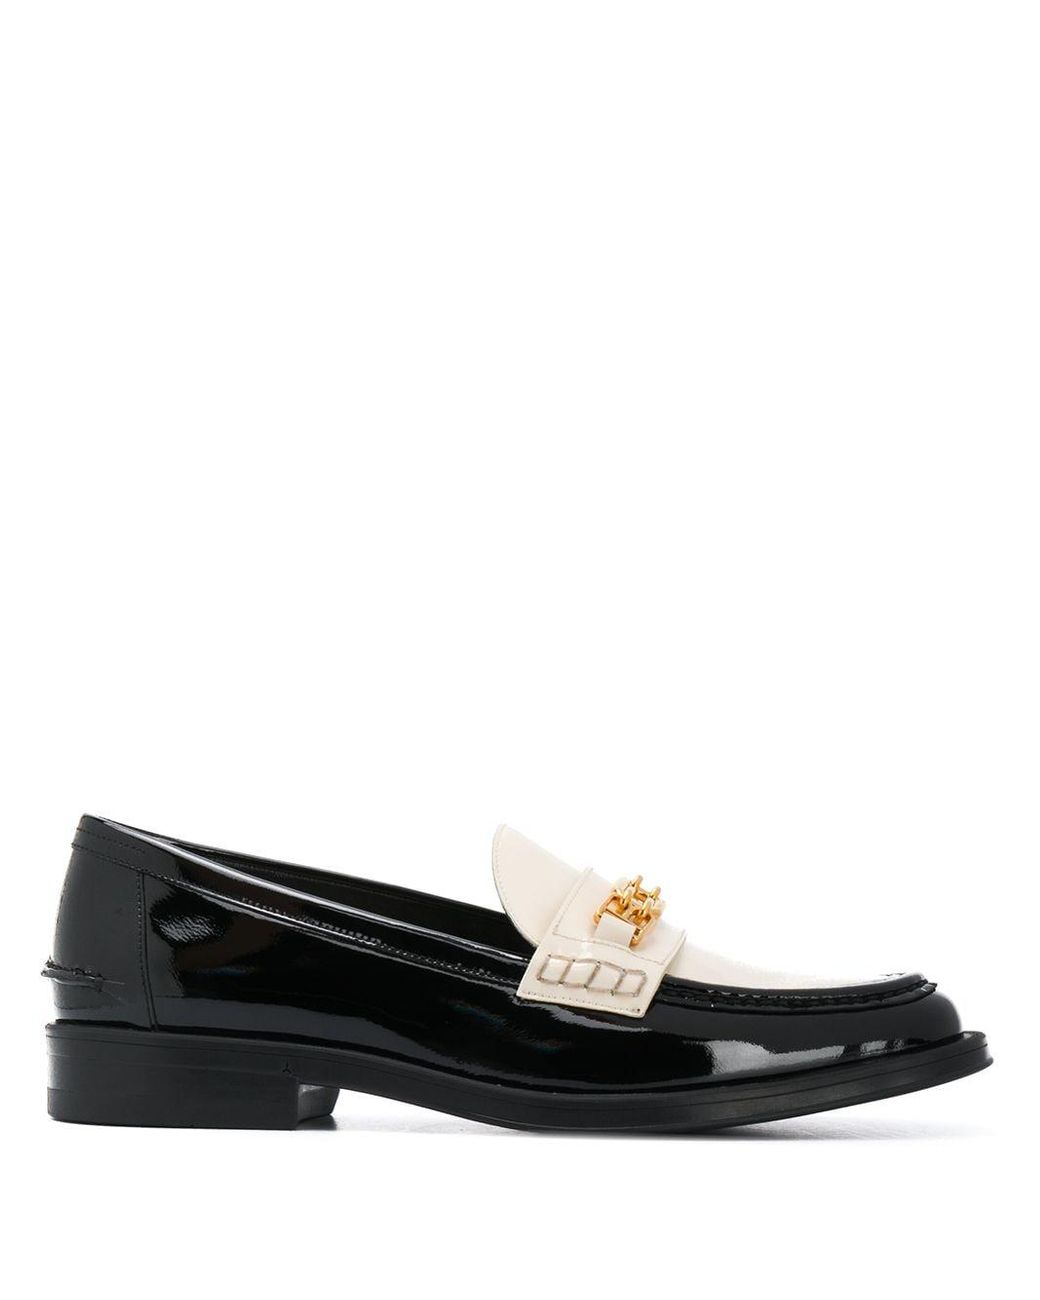 Bally Leather Two-tone Loafers in Black - Lyst